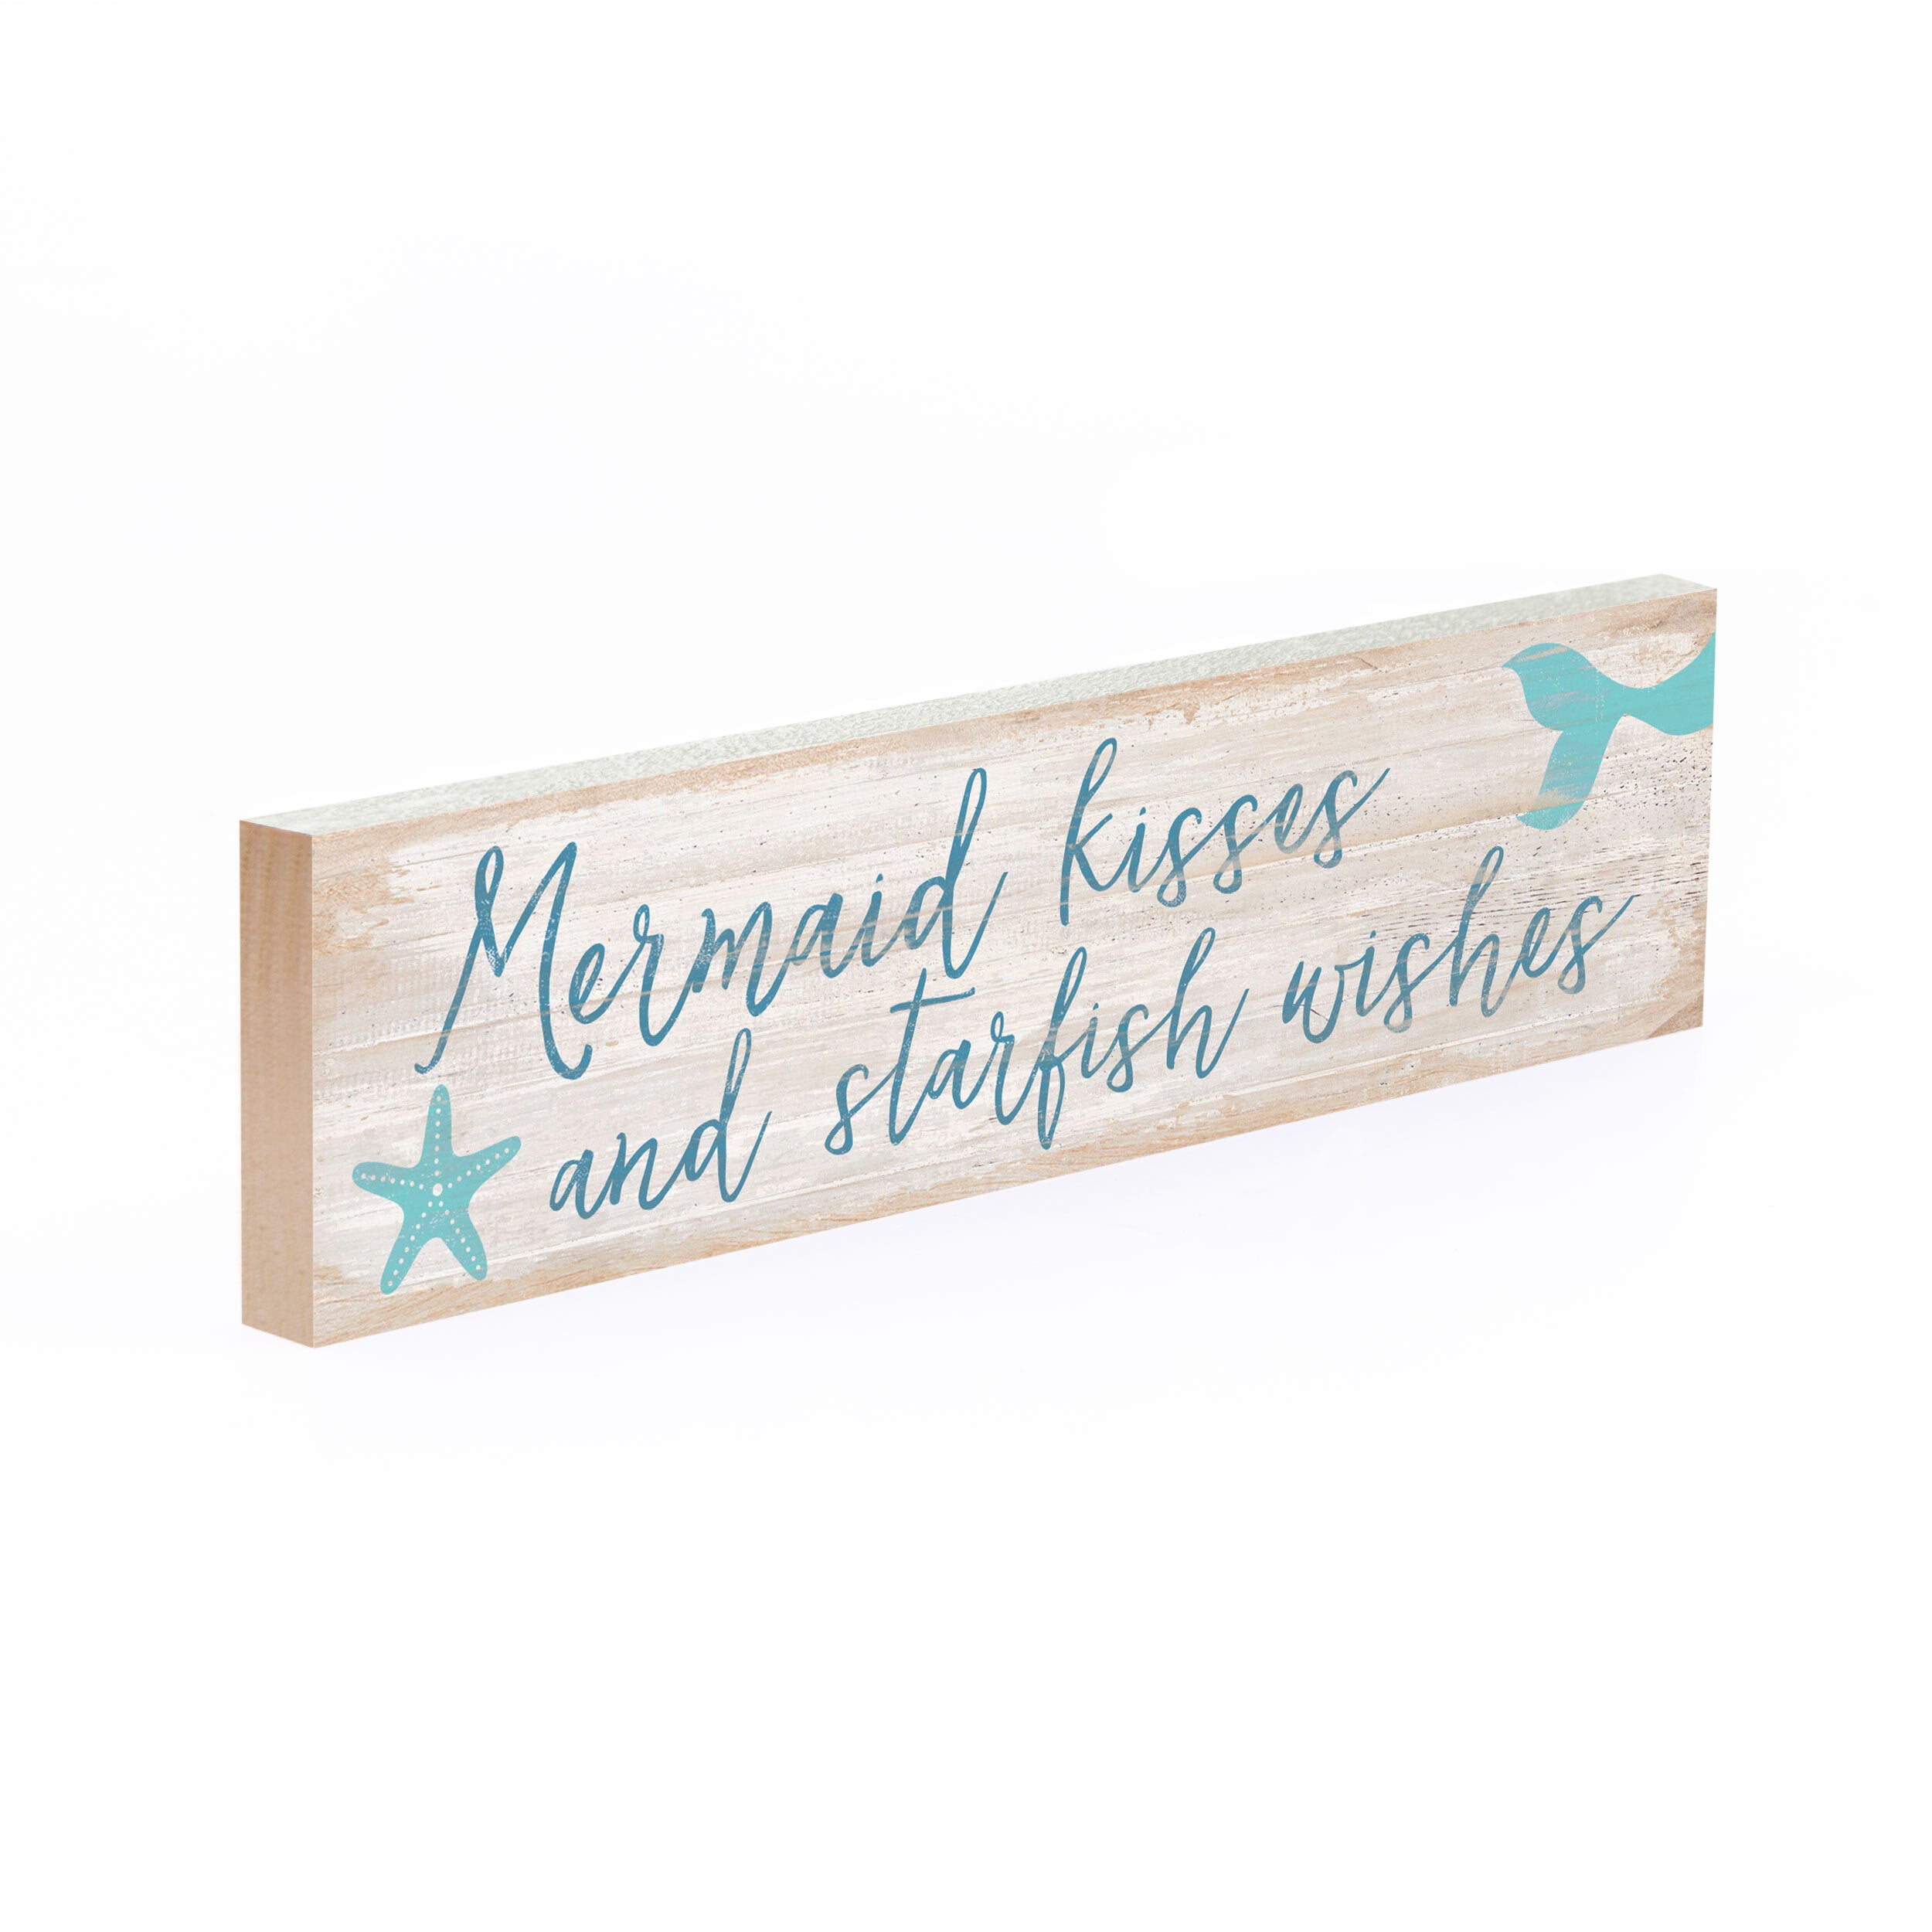 Mermaid Kisses And Starfish Wishes Small Sign